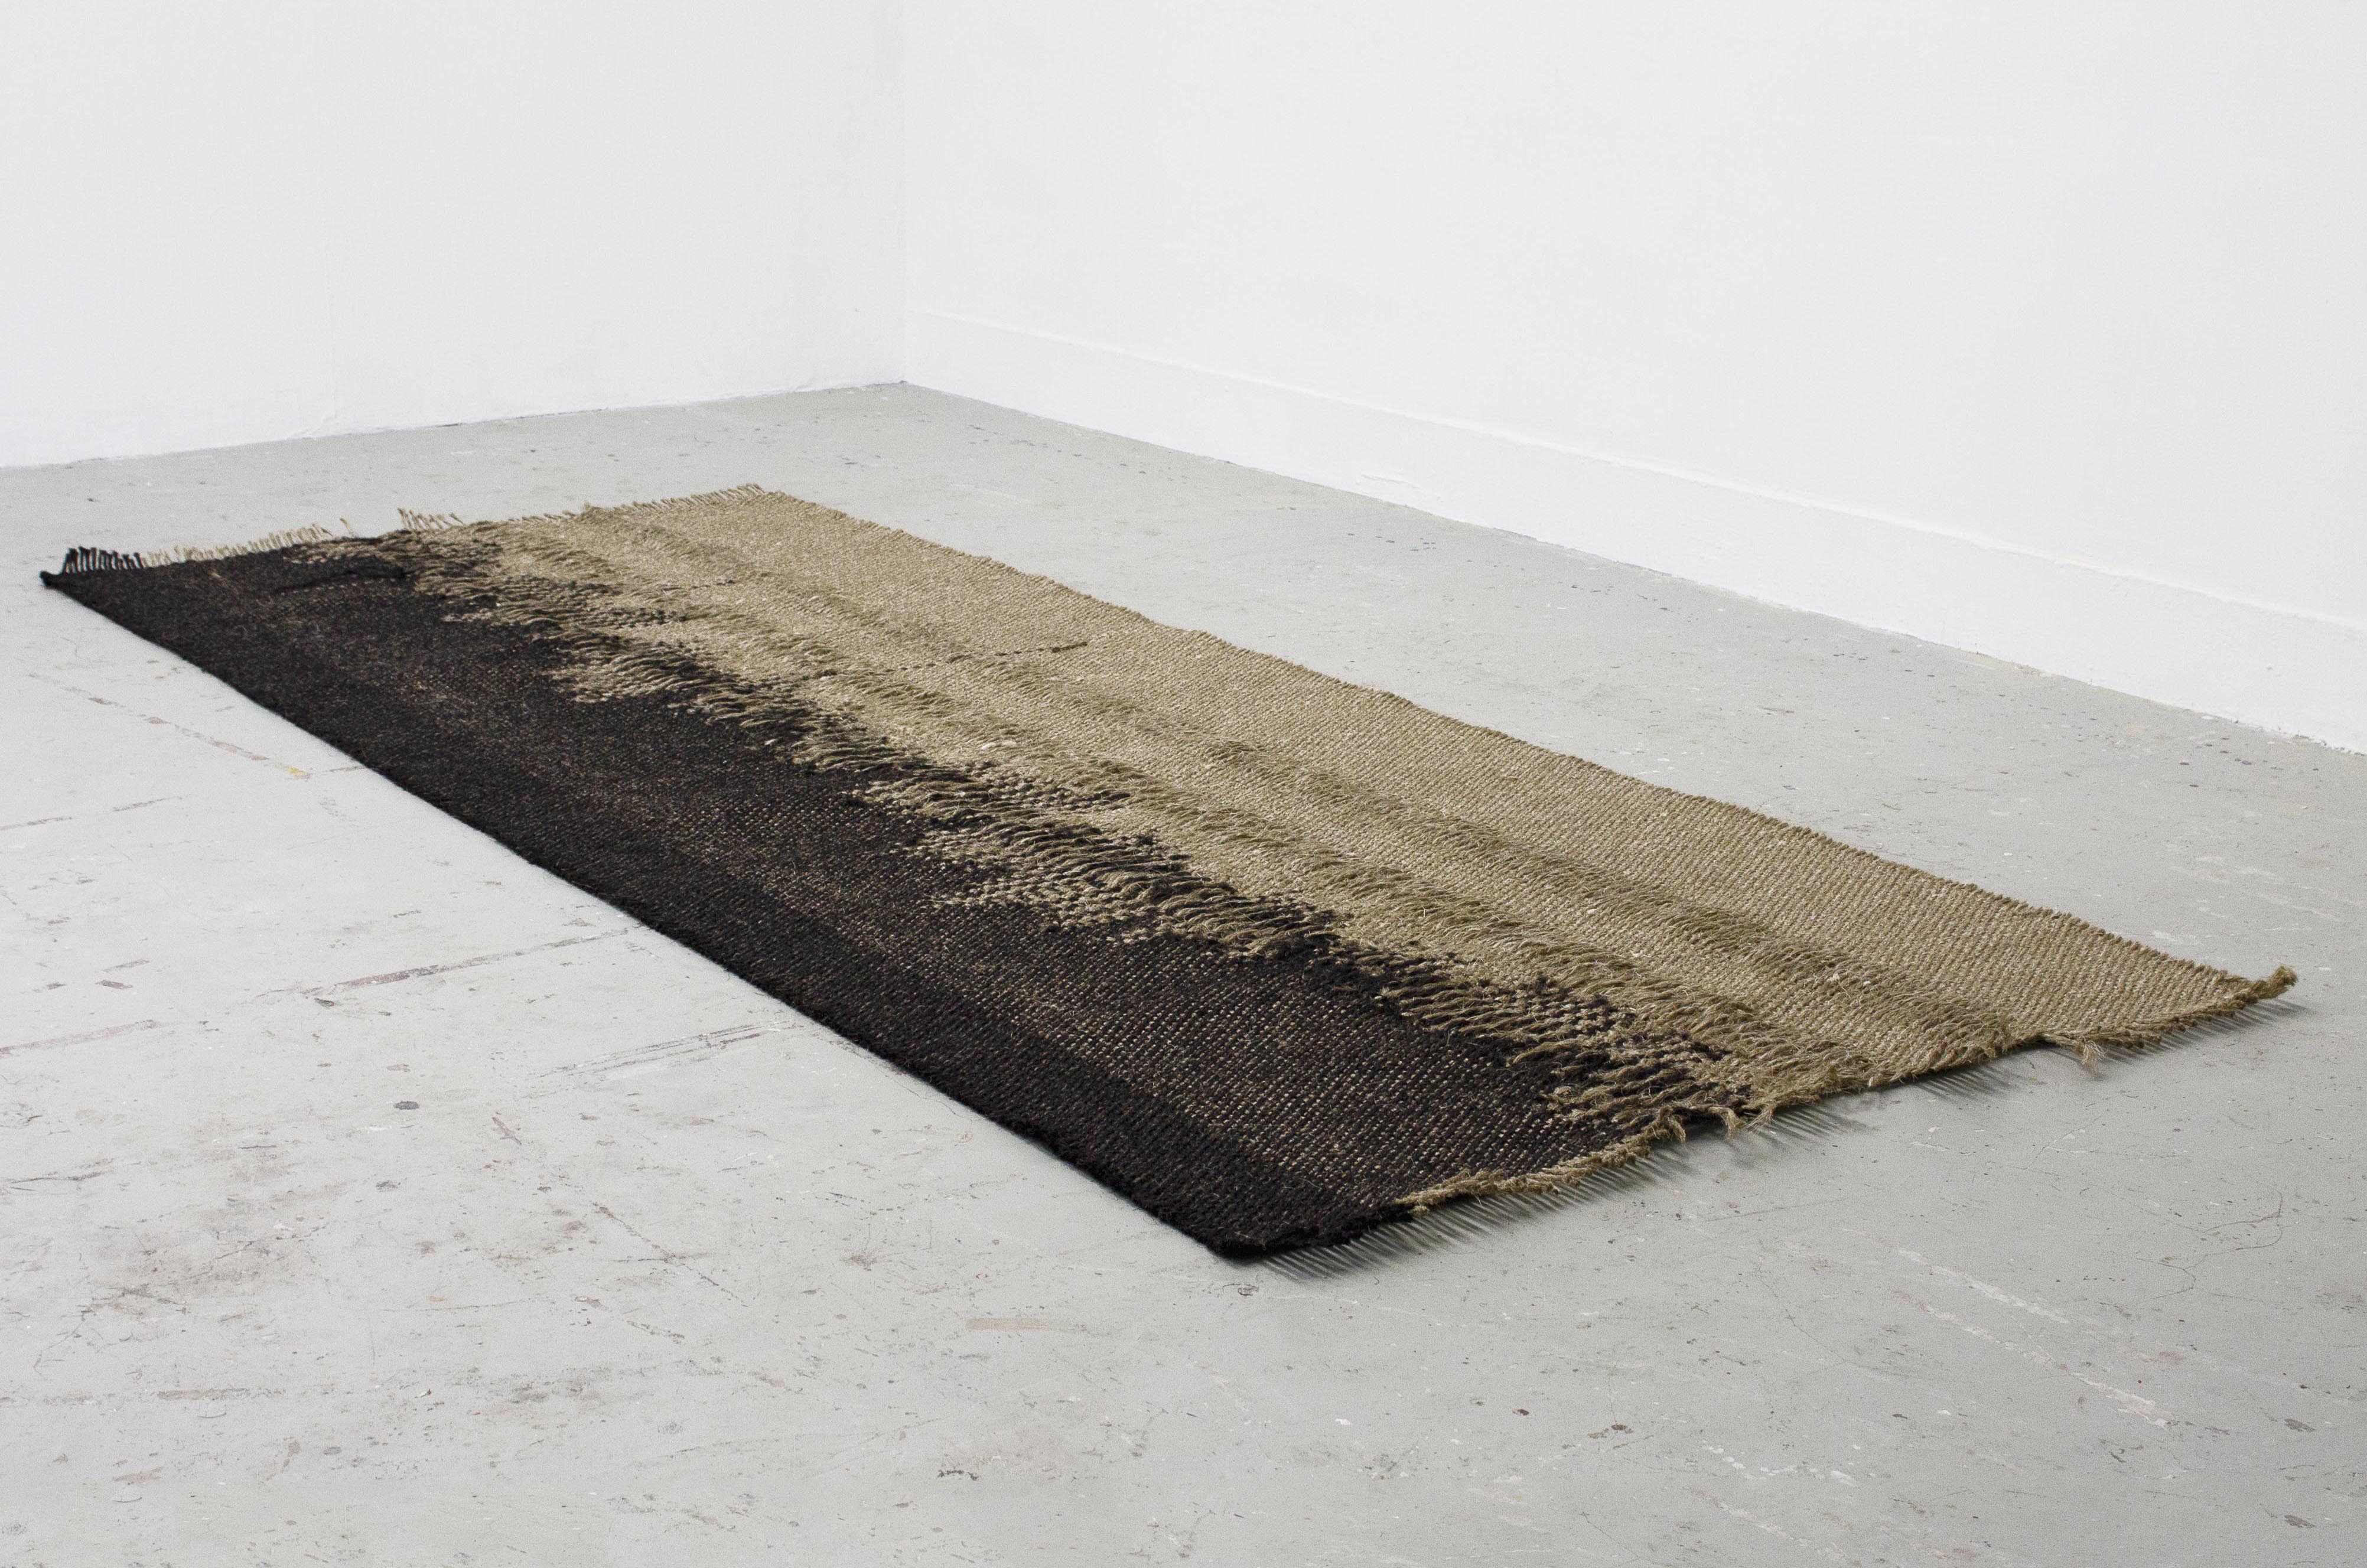 Gathering: the rug as a shared space by Bram van Breda